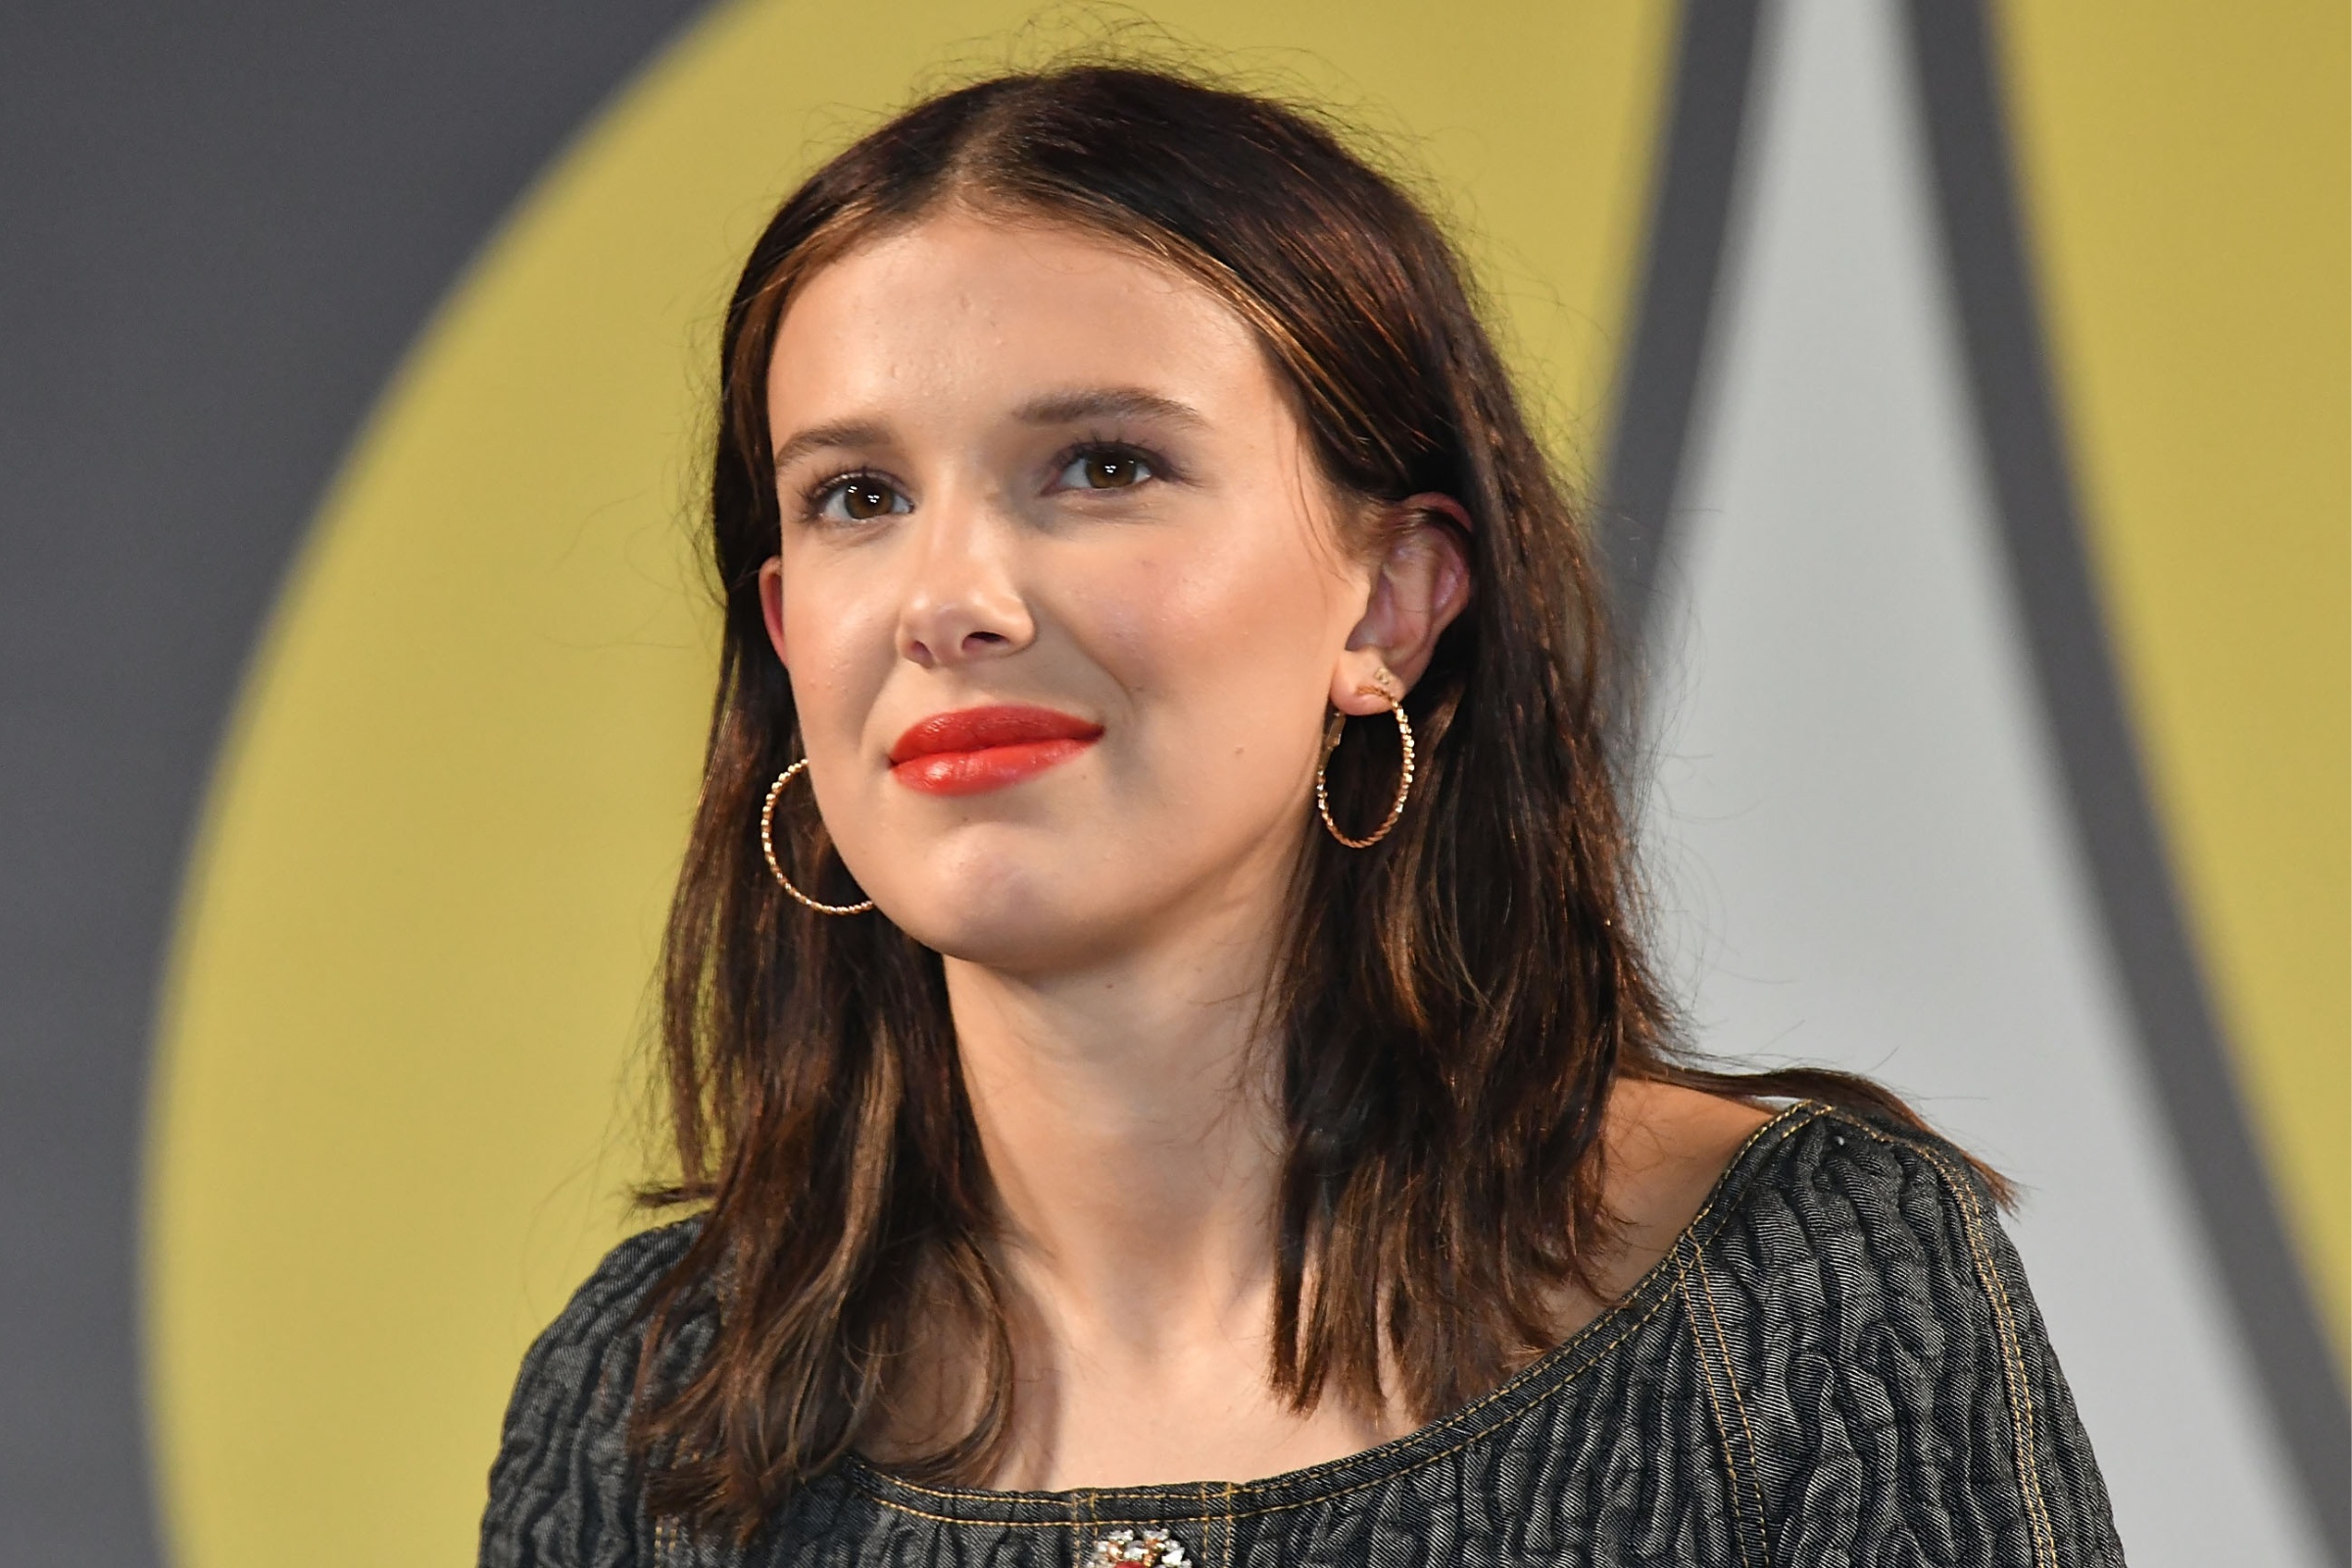 Millie Bobby Brown's Engagement Sparks Debate About Her Age